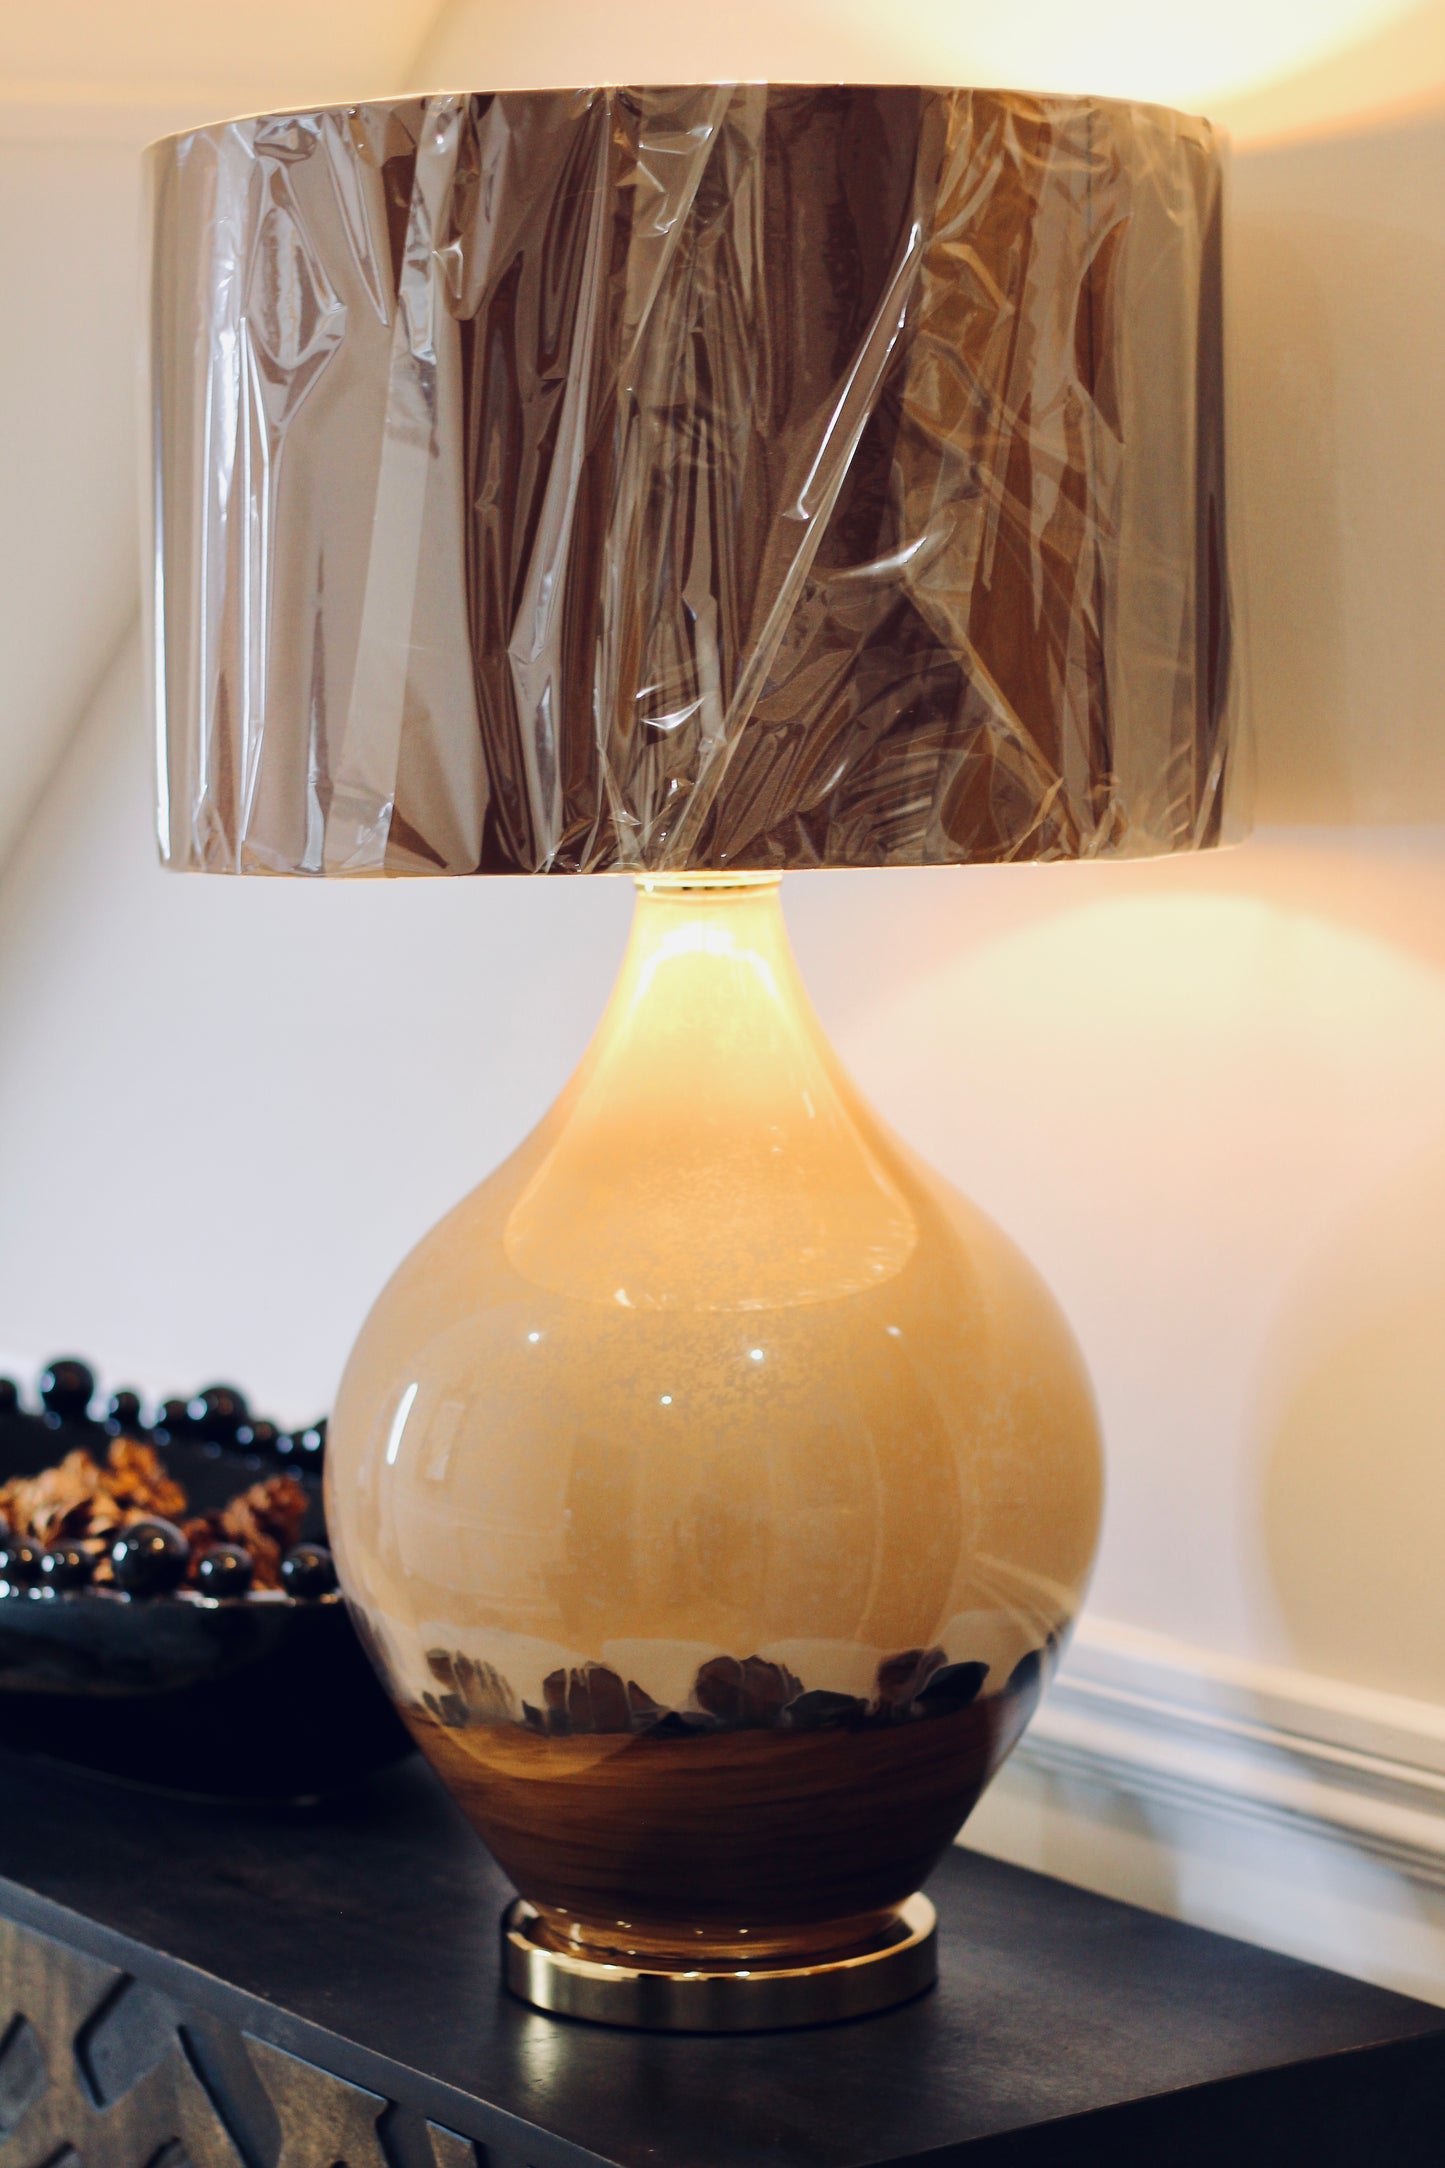 Two Tone Brown Table Lamp